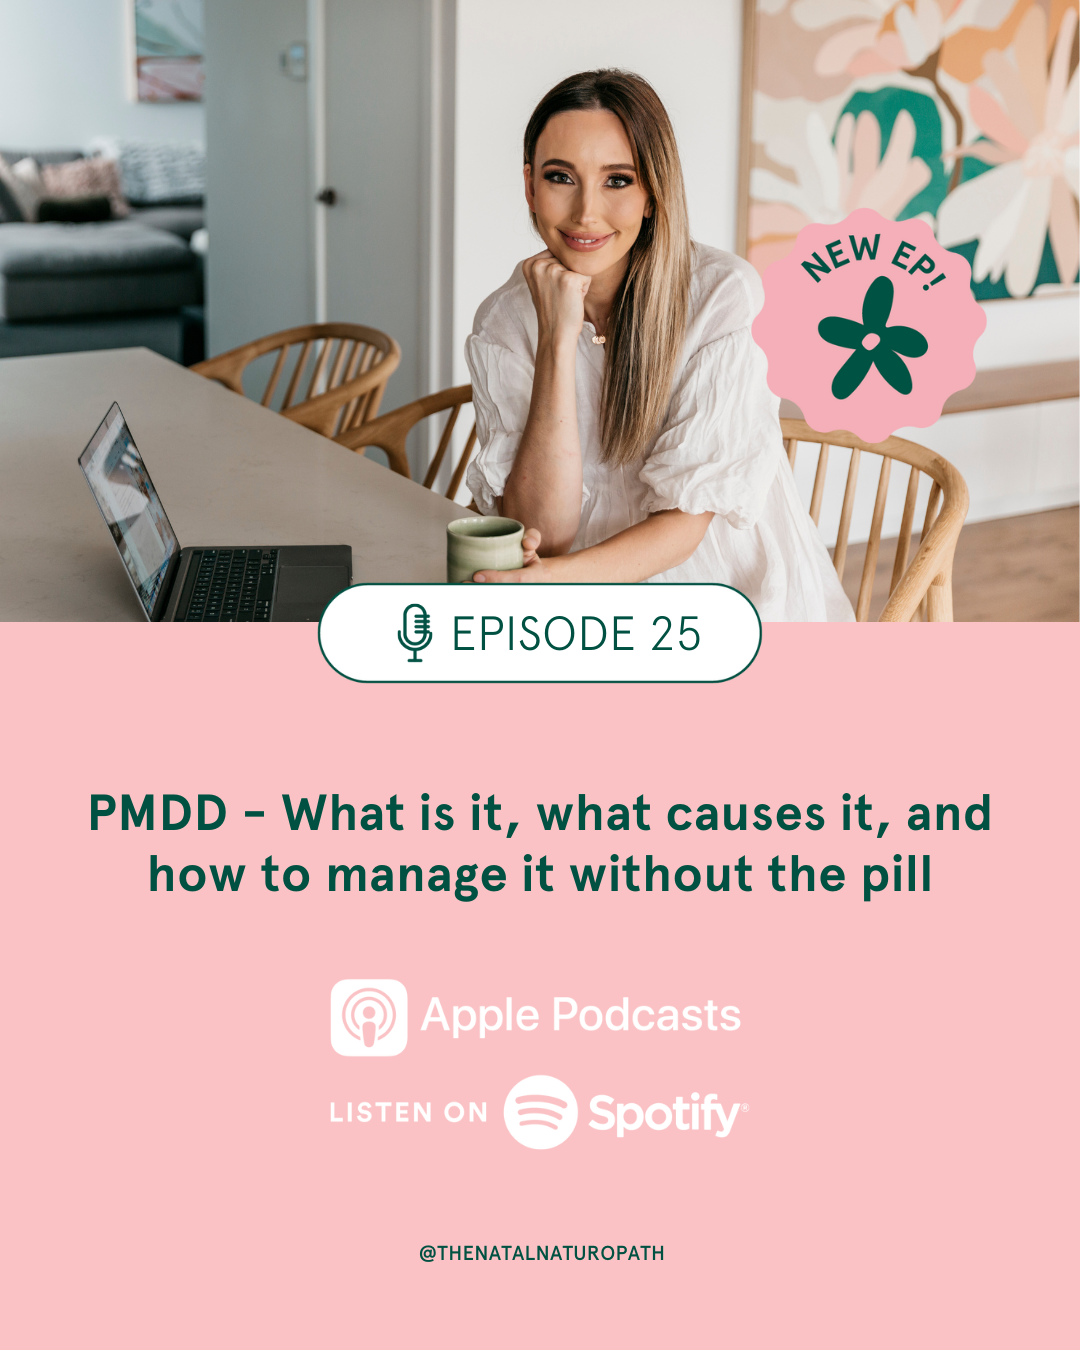 PMDD – What is it, what causes it, and how to manage it without the pill